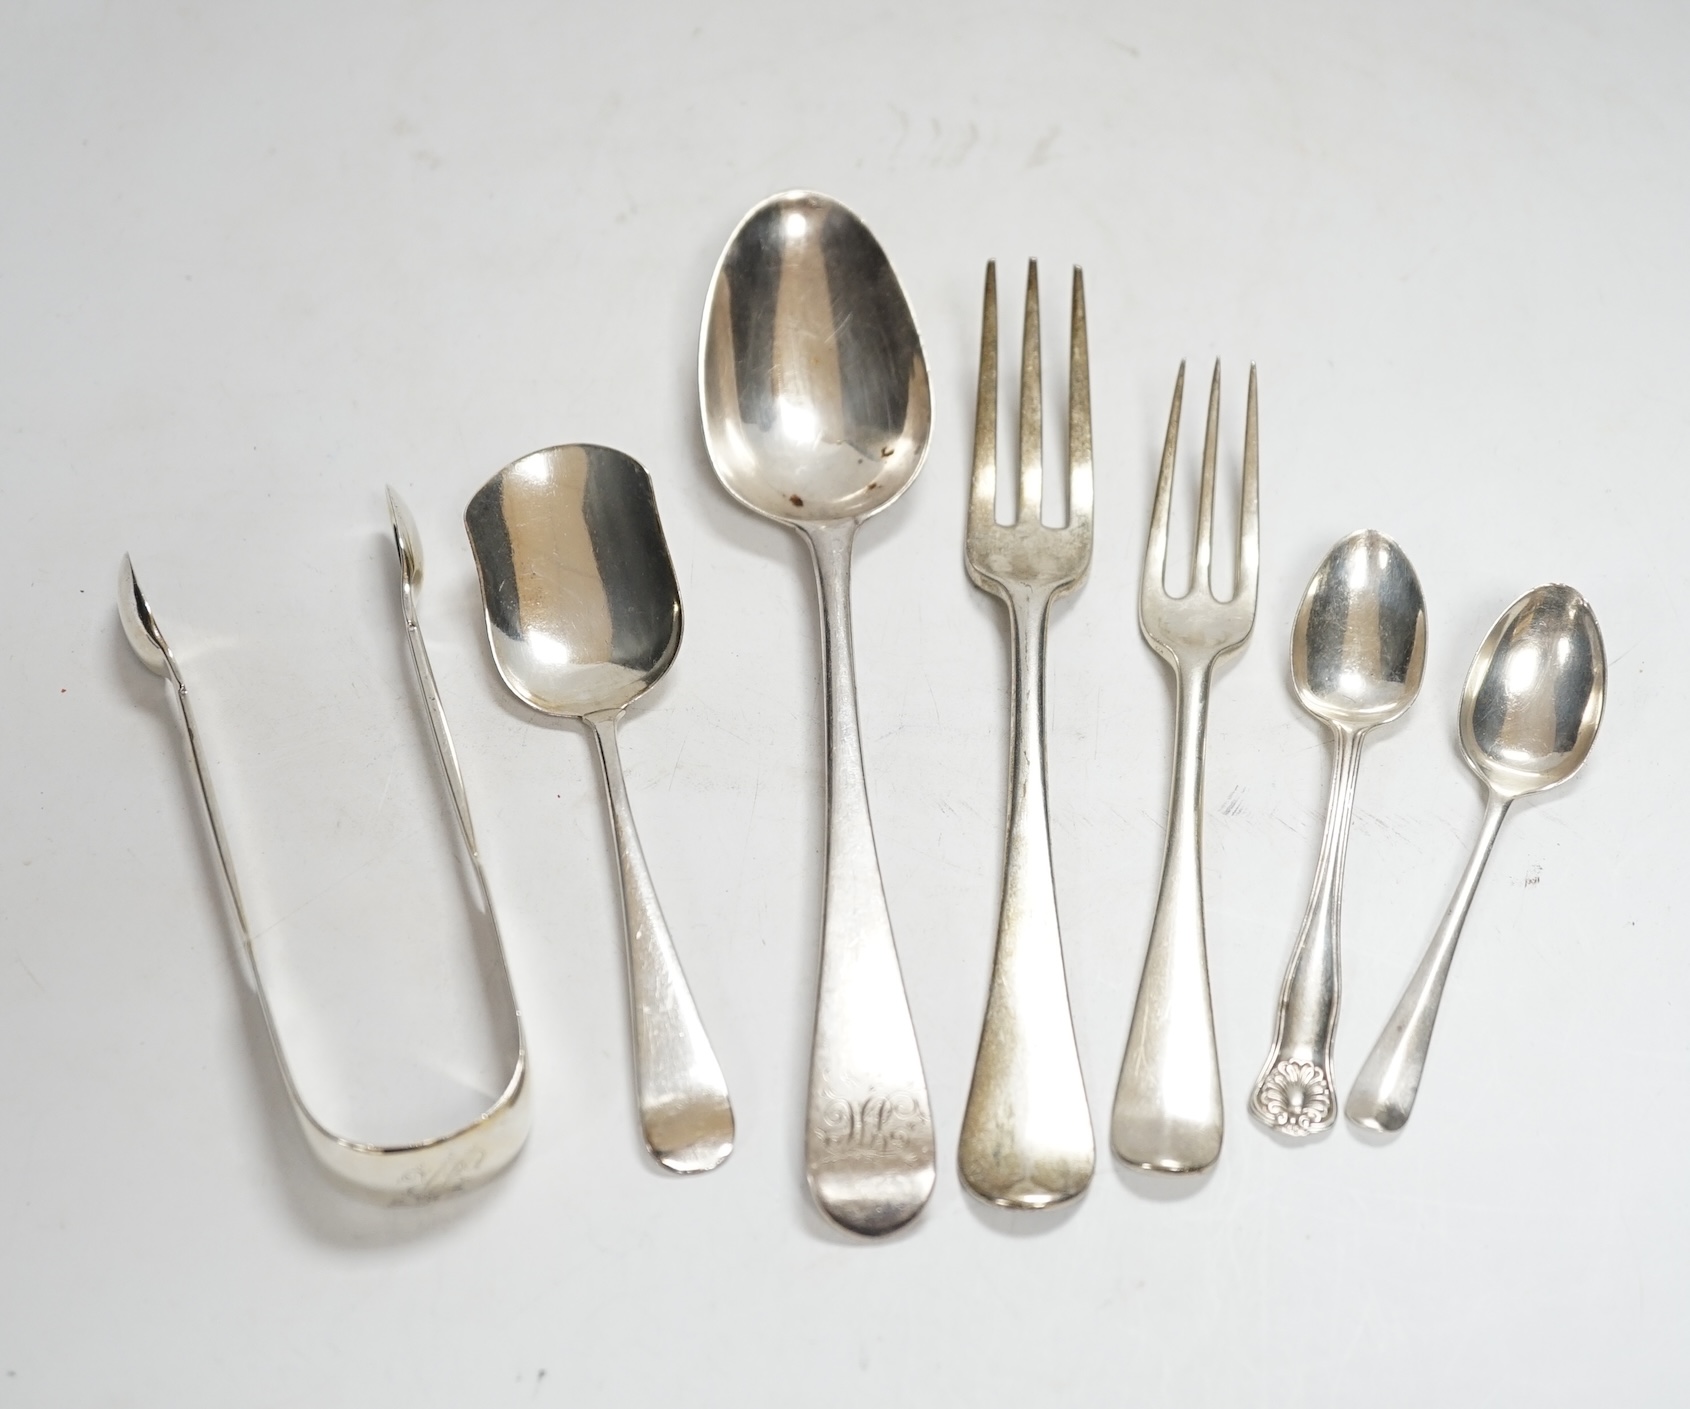 A small quantity of 19th century and later silver flatware, including three pairs of Georgian sugar tongs and nine 19th century and later three pronged forks